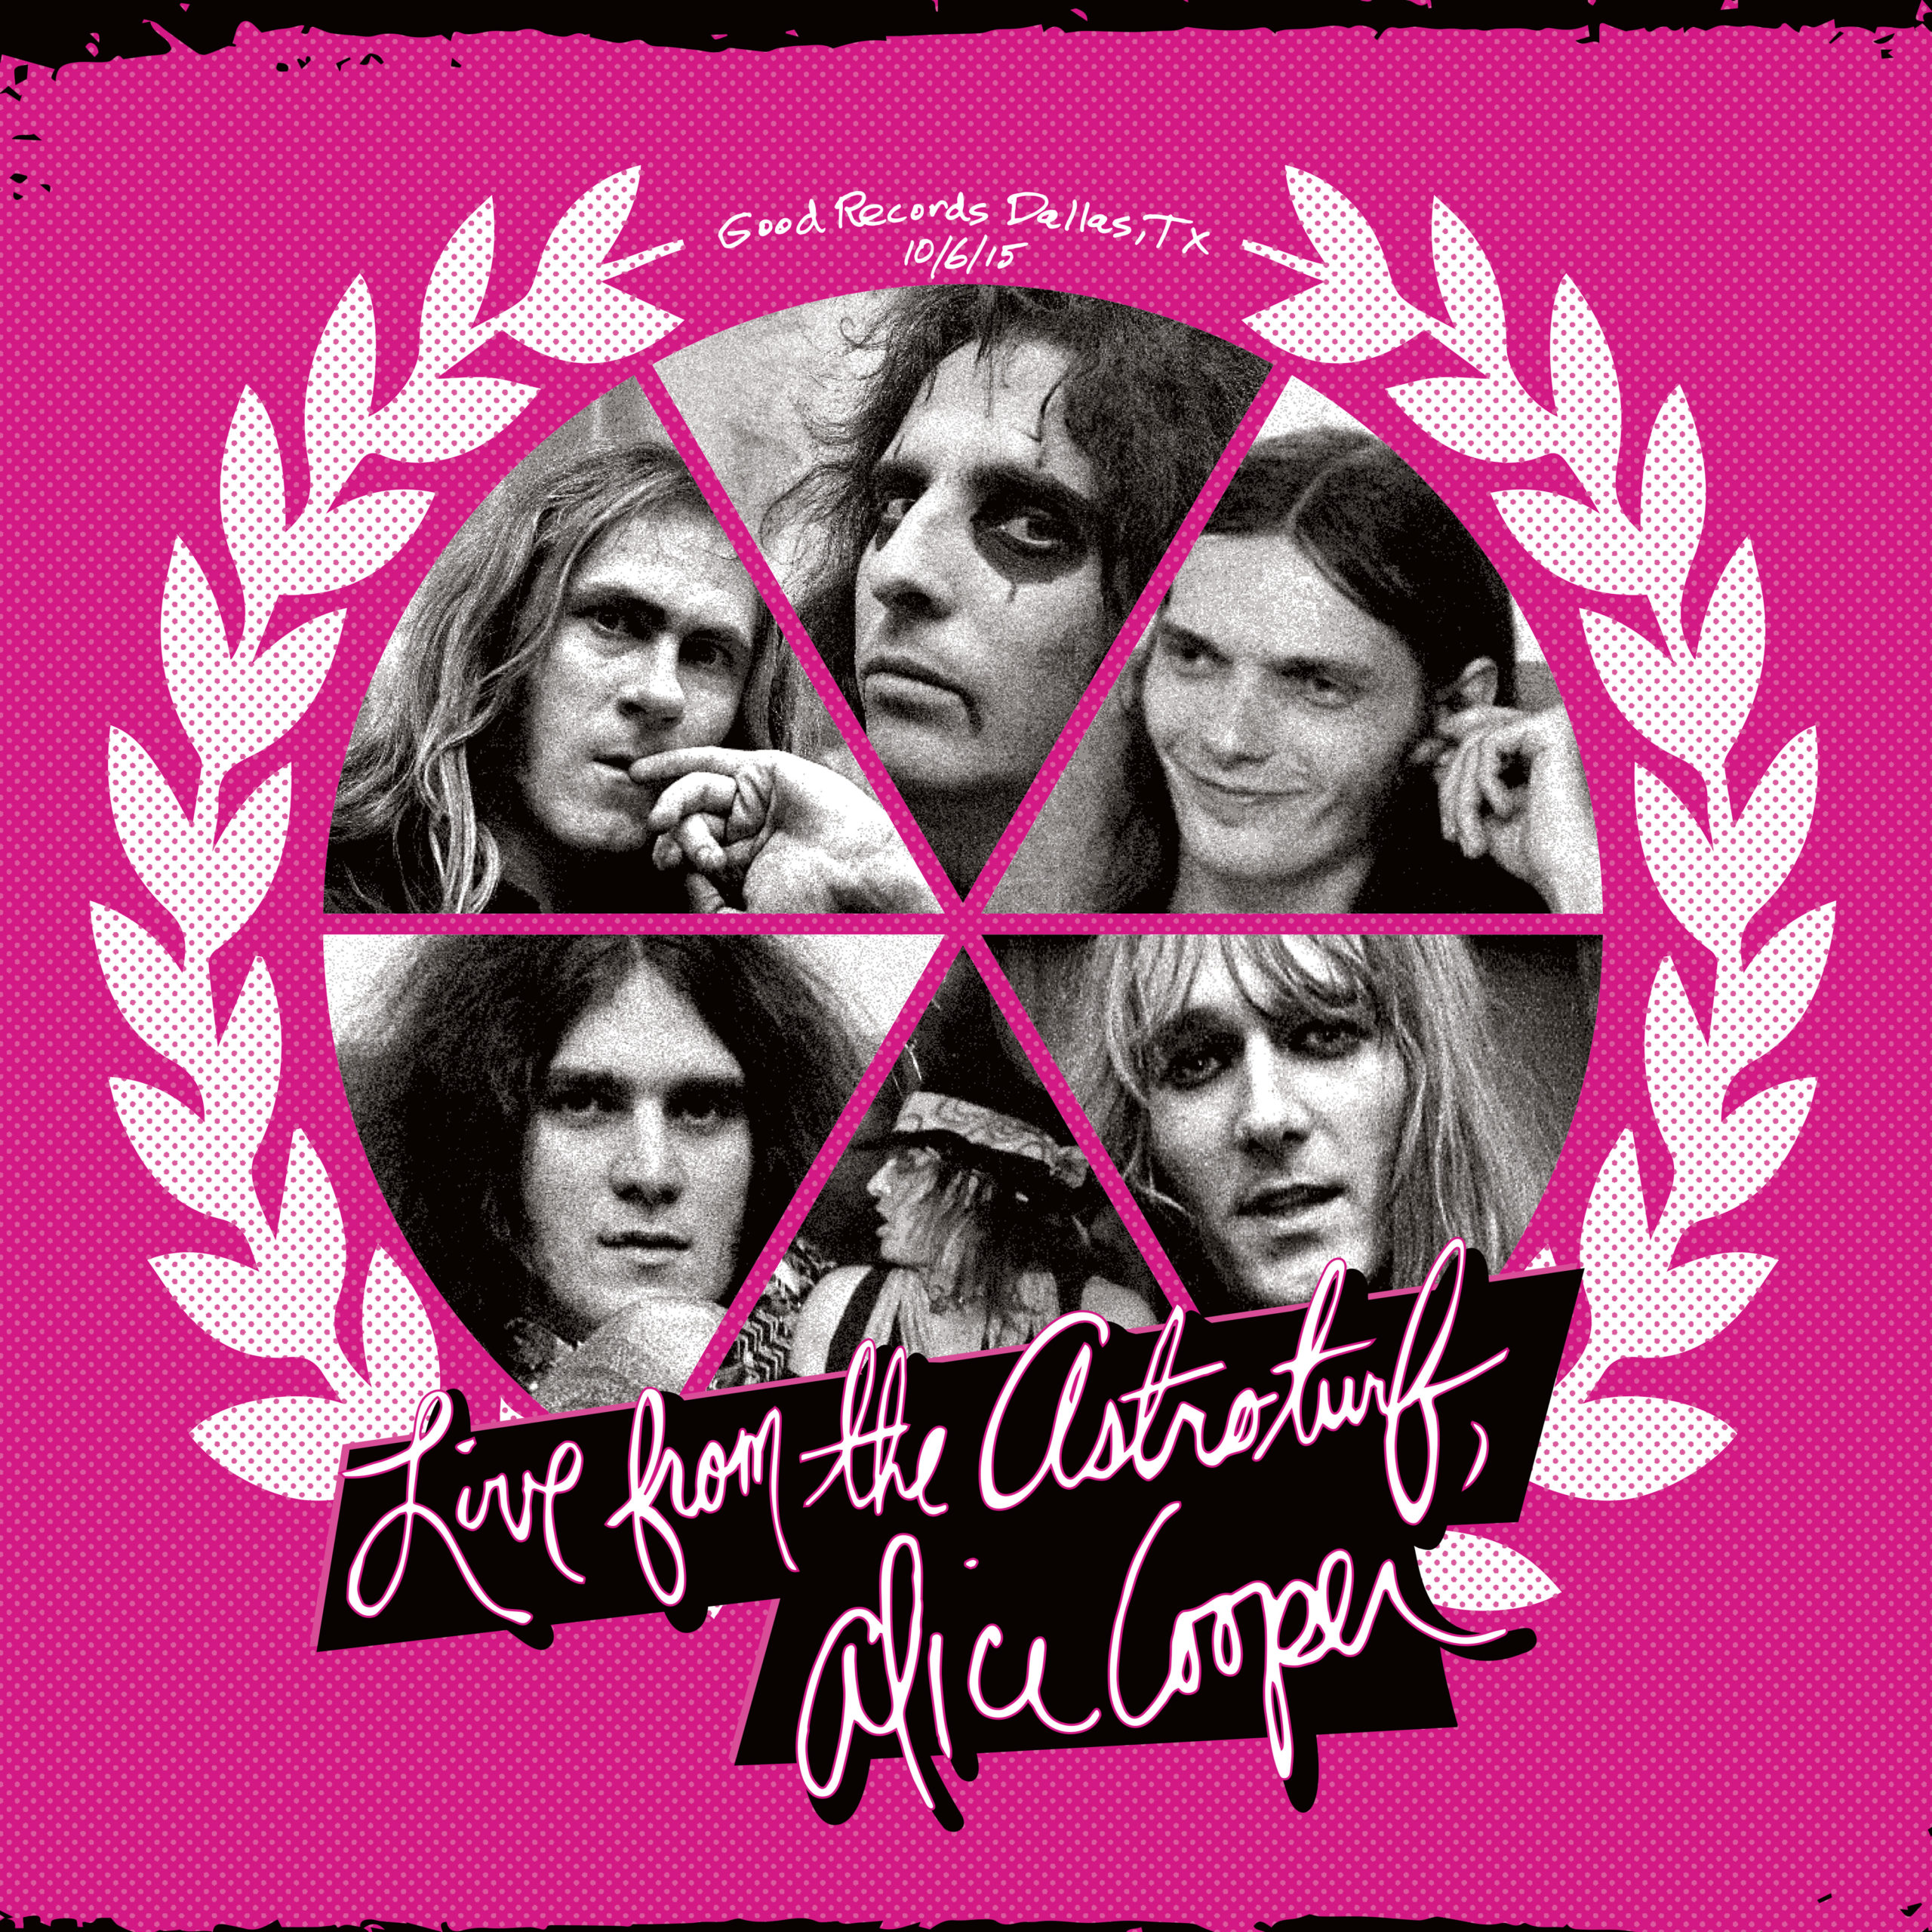 The pink cover of Alice Cooper's album features the faces of the original line-up